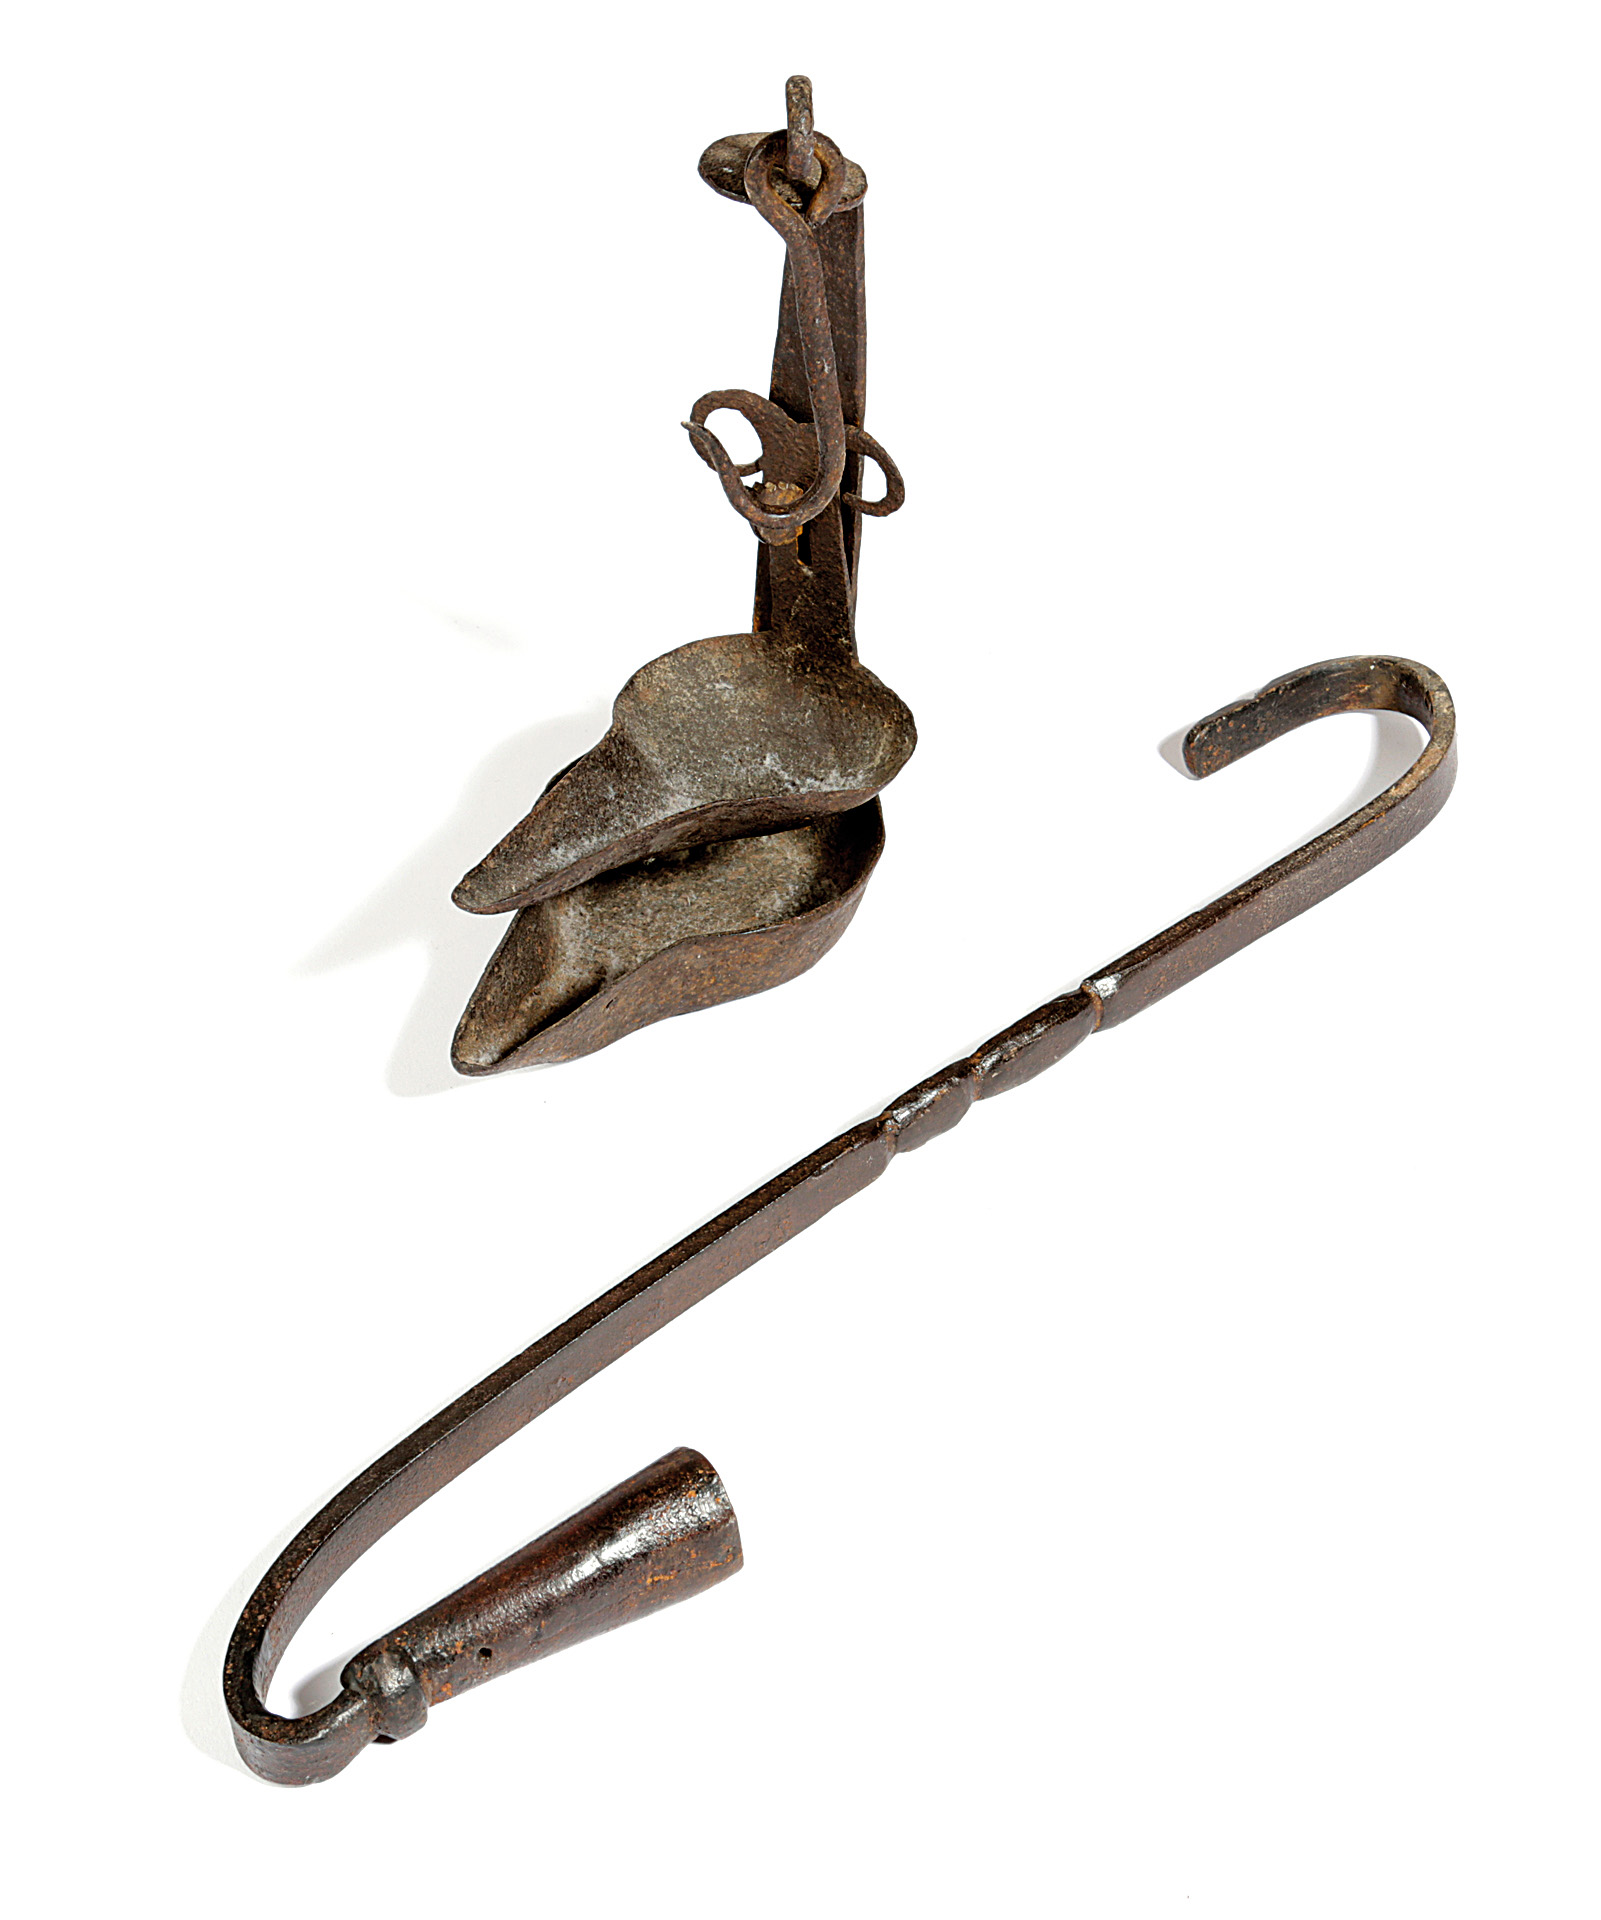 A WROUGHT IRON HANGING CANDLEHOLDER 18TH CENTURY with an upper hook and moulded decoration to the